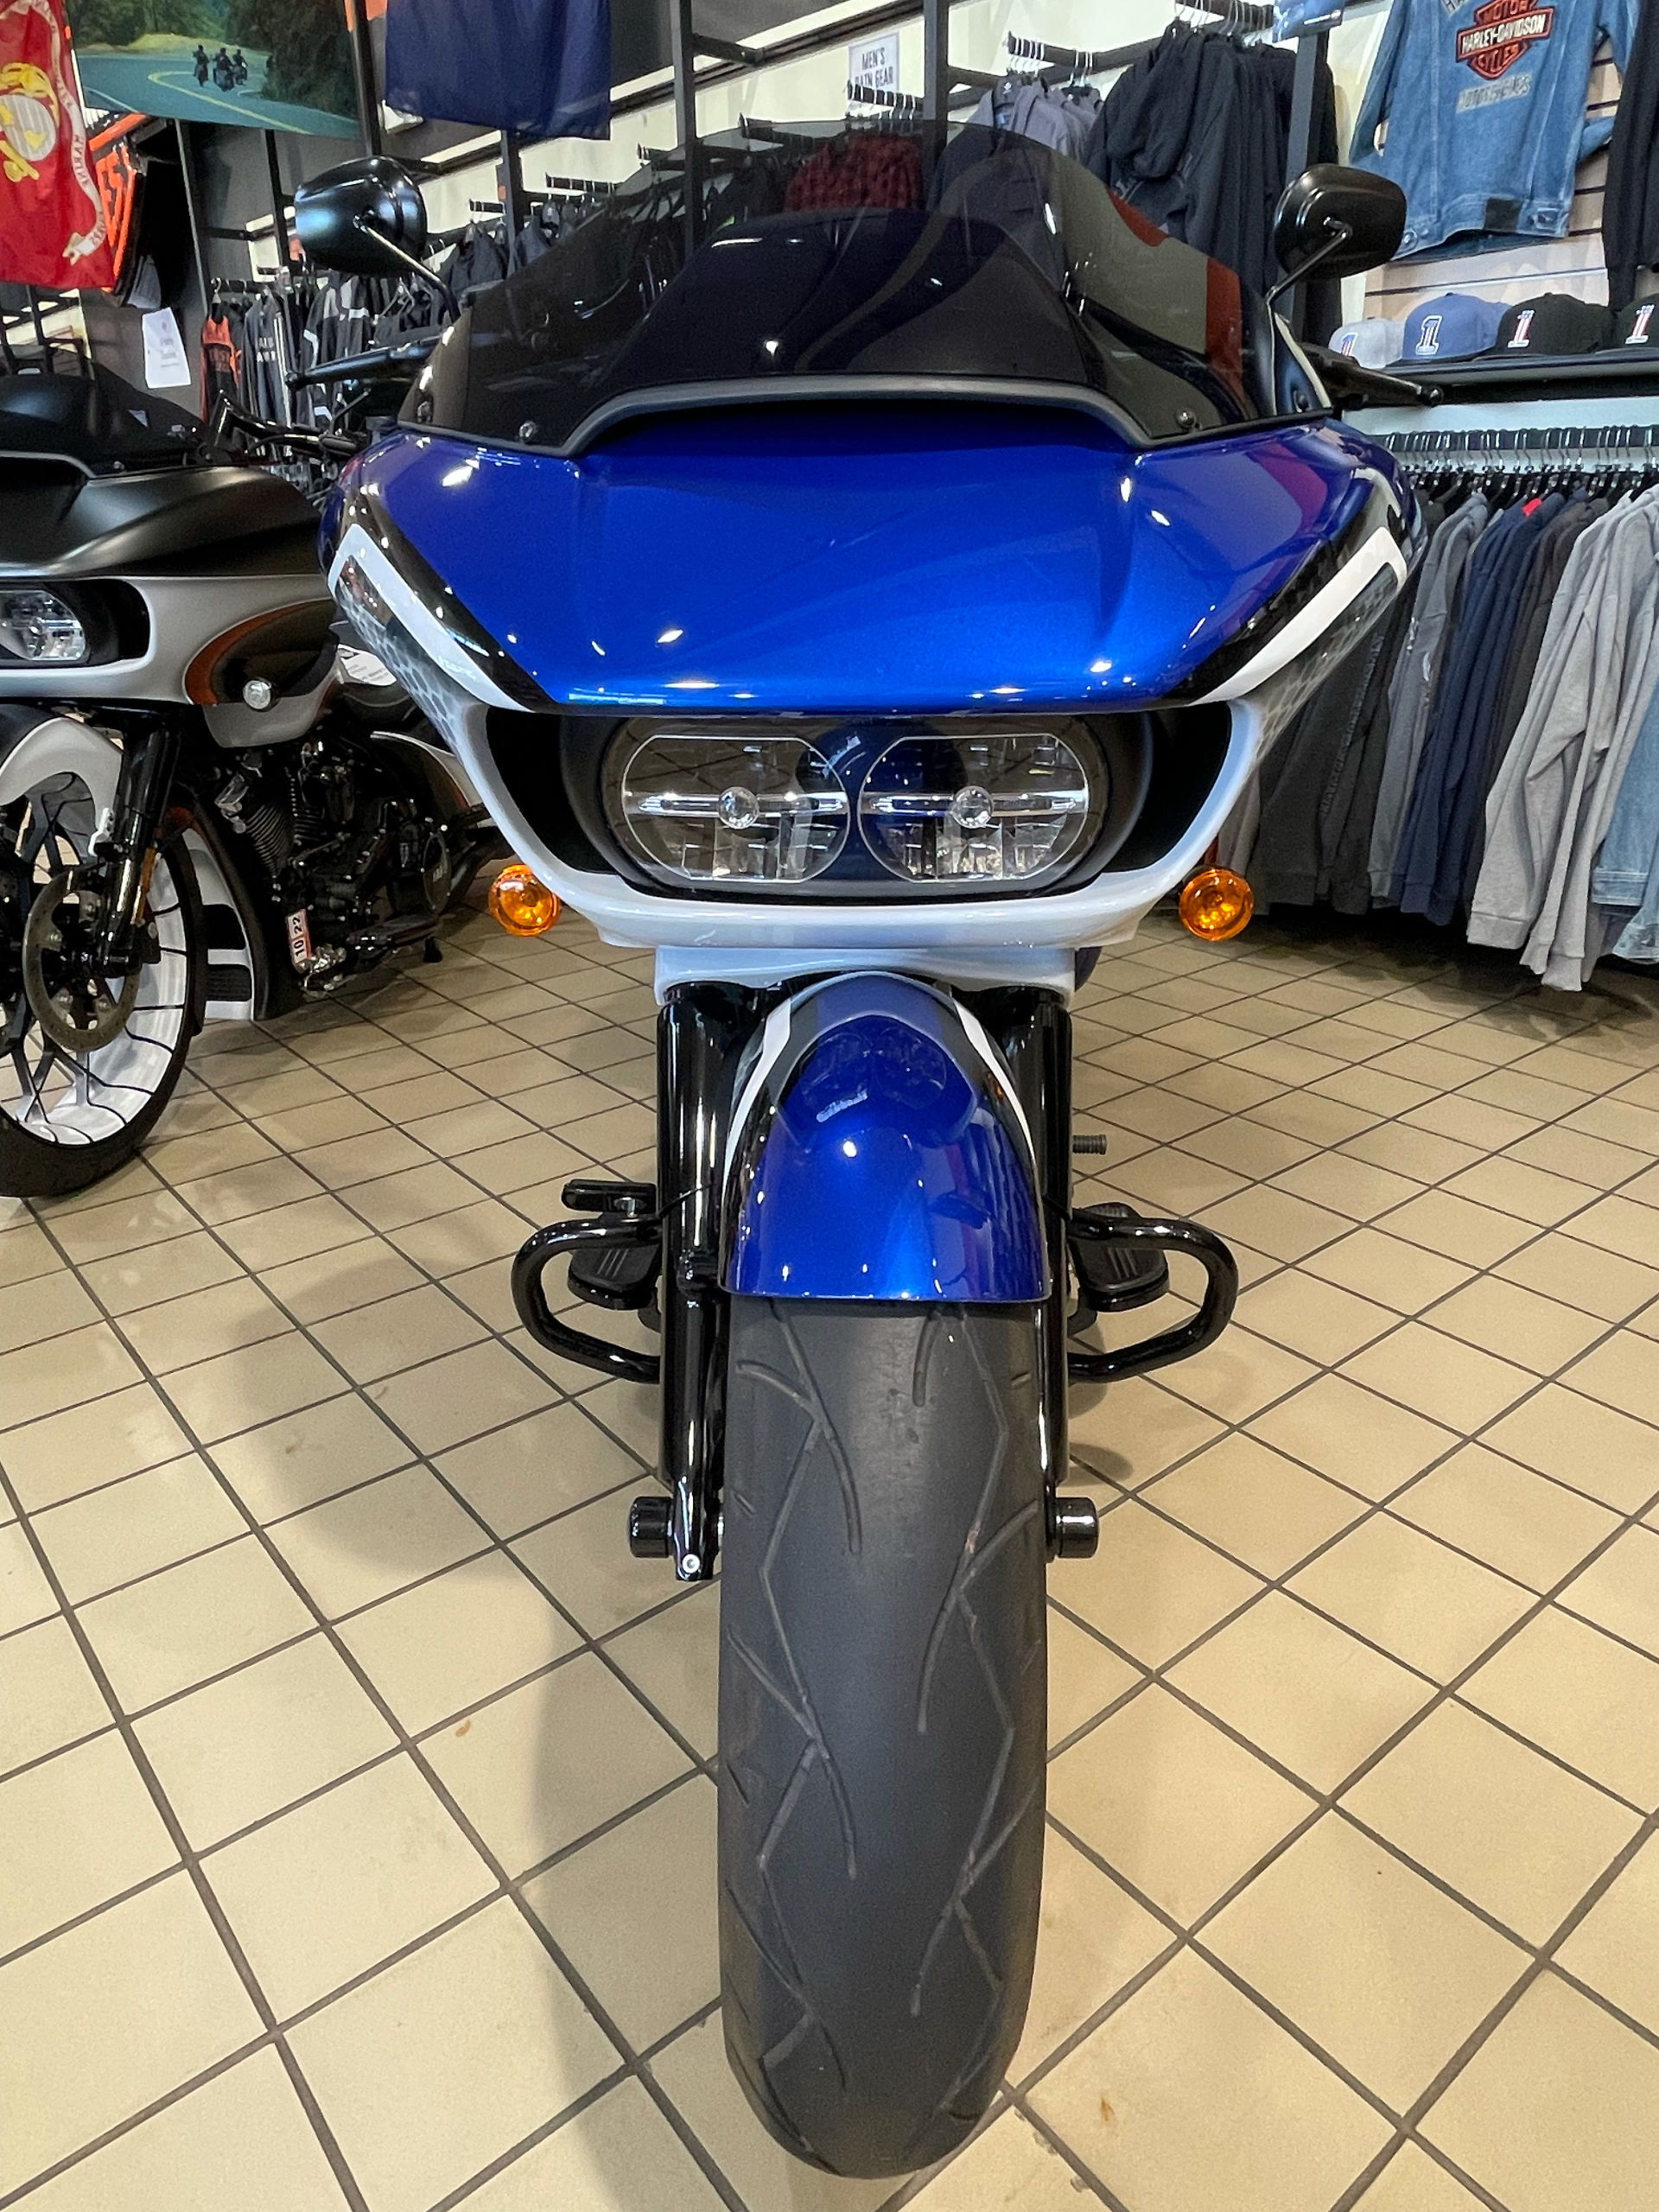 2021 Harley-Davidson Road Glide® Special in Dumfries, Virginia - Photo 17